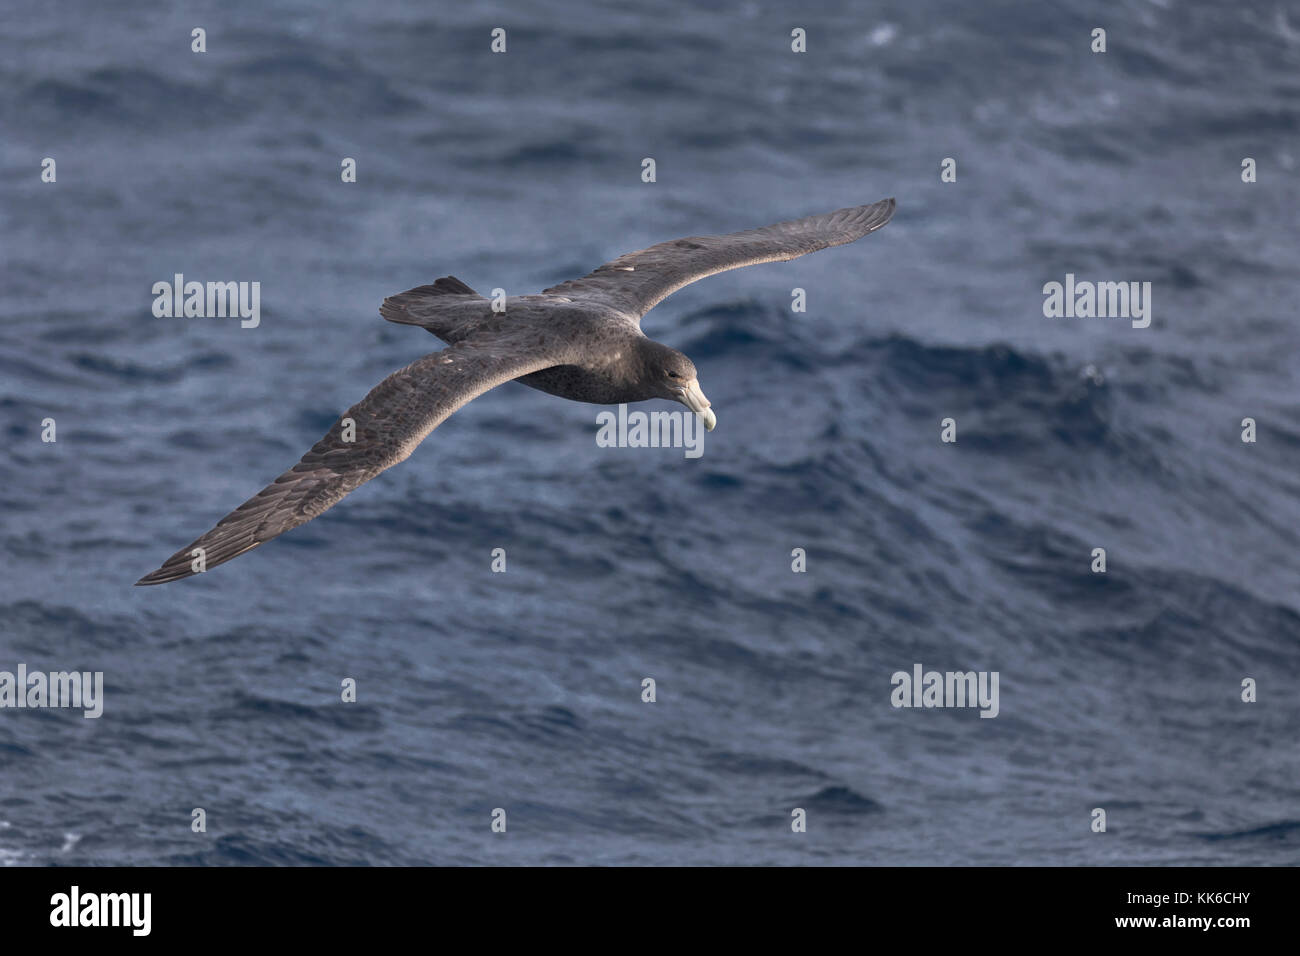 Southern giant petrel gliding above the South Atlantic Ocean Stock Photo